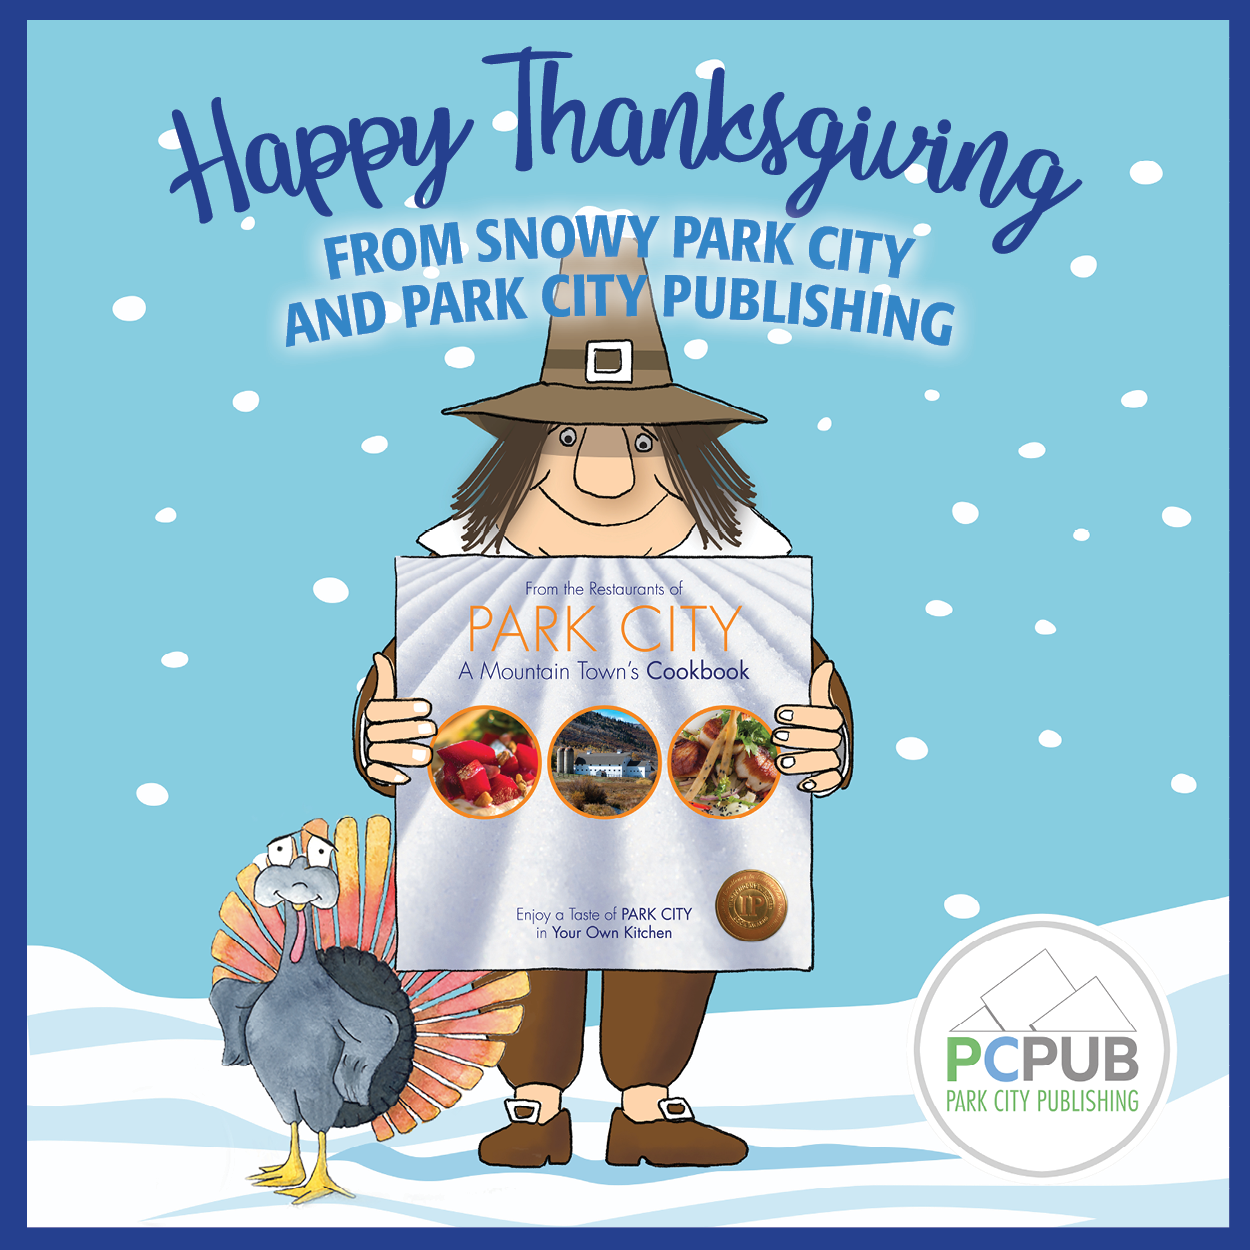 Happy Thanksgiving on this wonderful snowy day! Park City Publishing